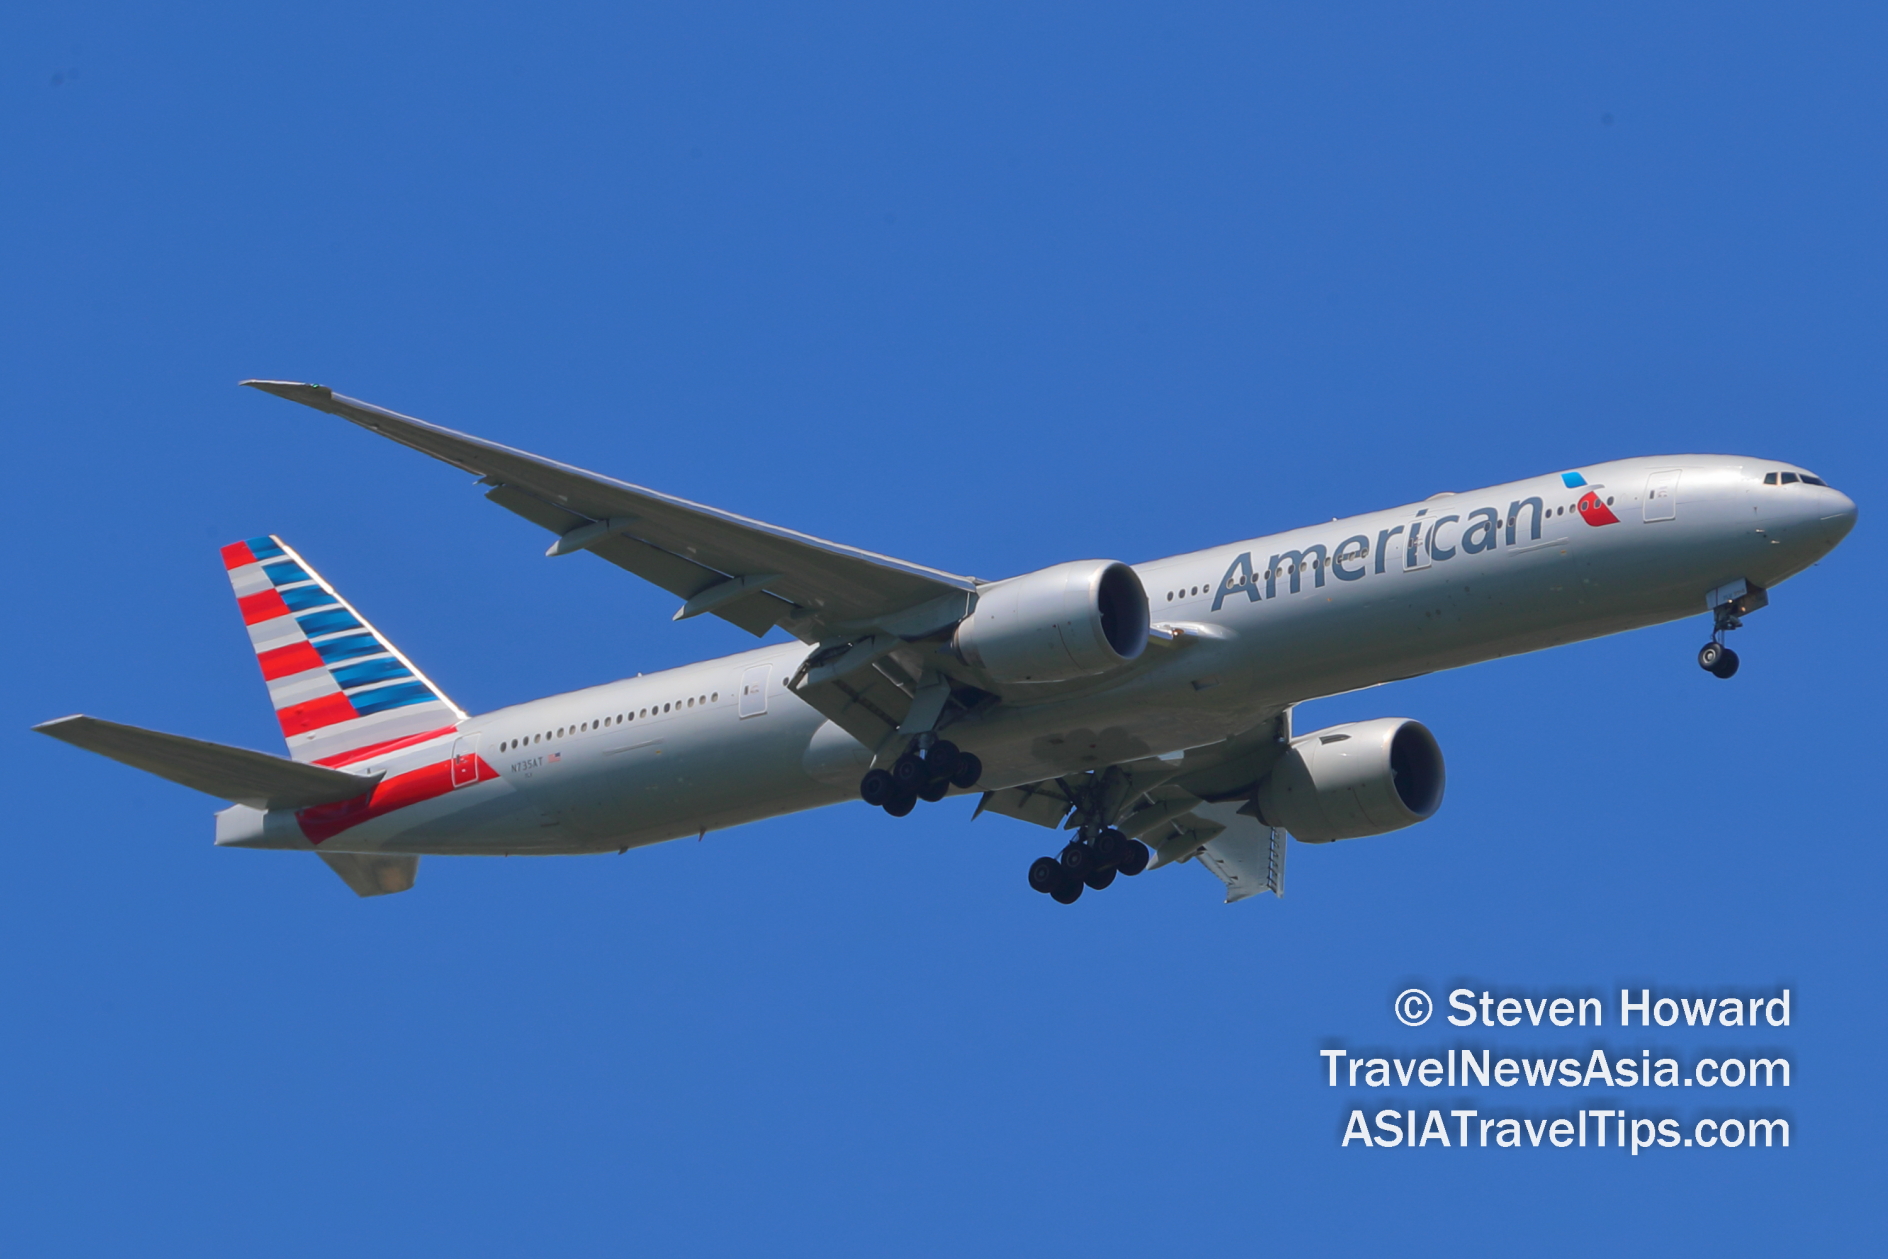 American Airlines B777 reg: N735AT. Picture by Steven Howard of TravelNewsAsia.com Click to enlarge.